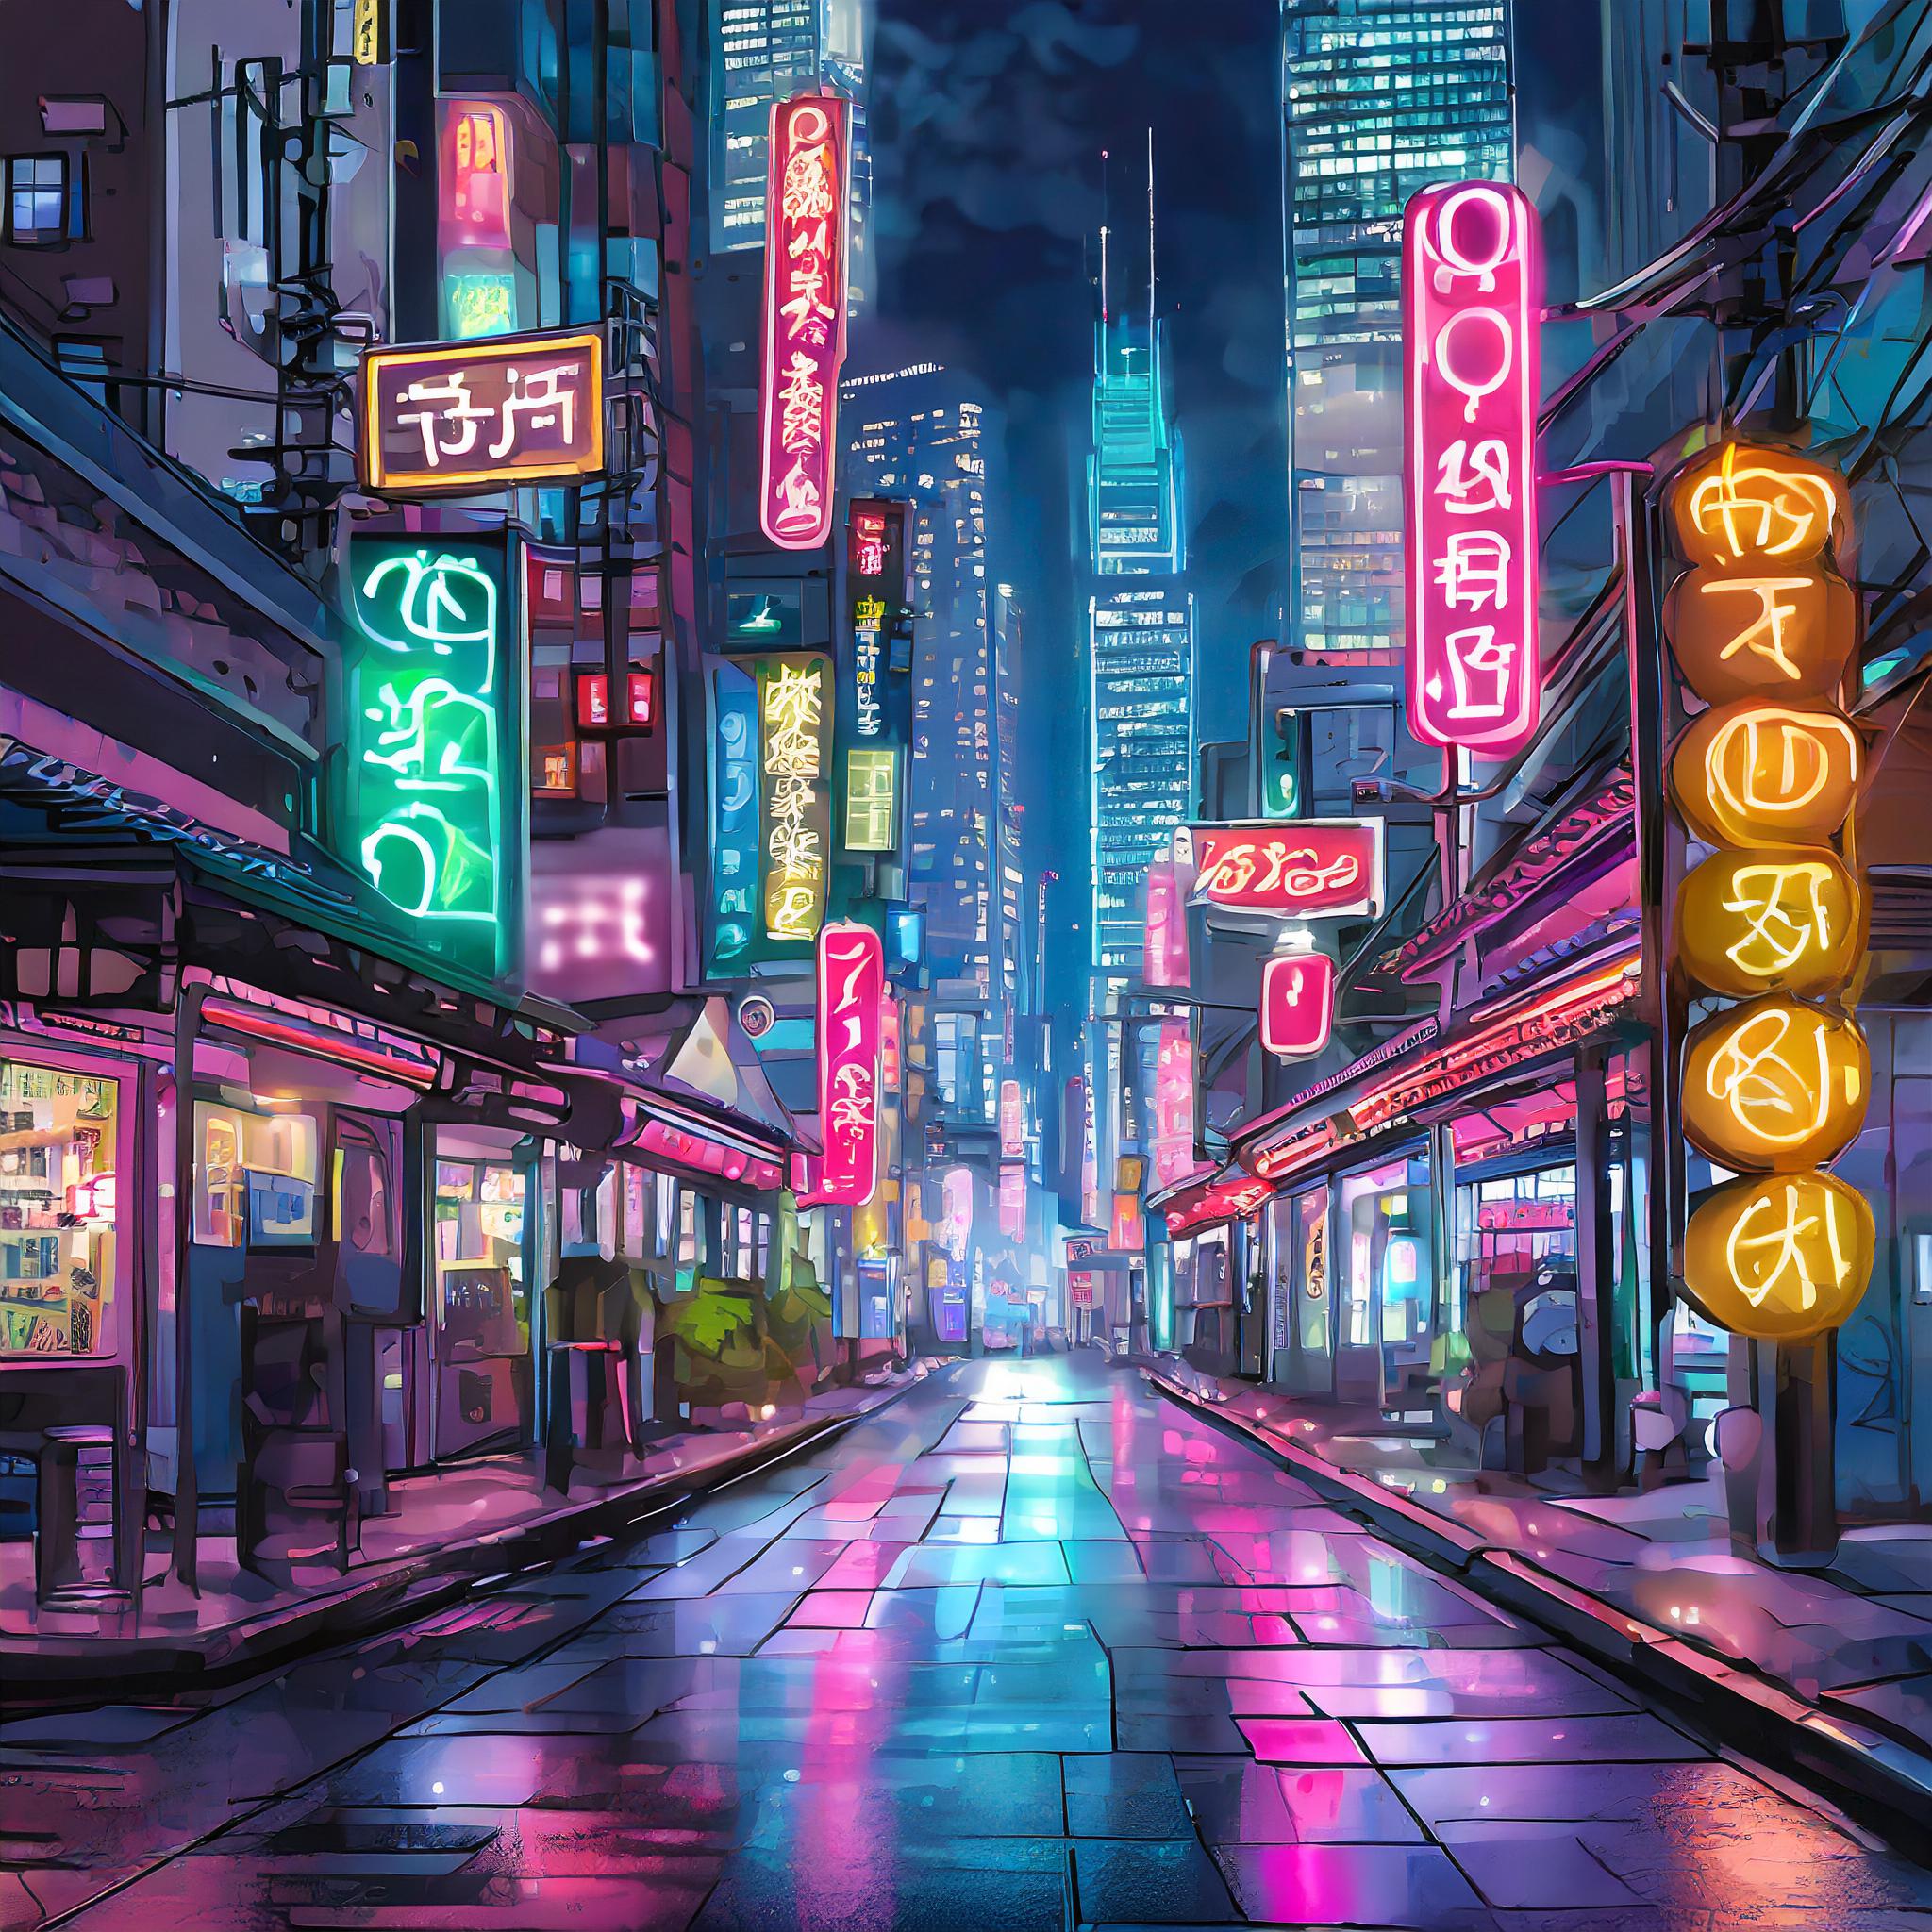  Neon sign filled streets of Tokyo, Japan